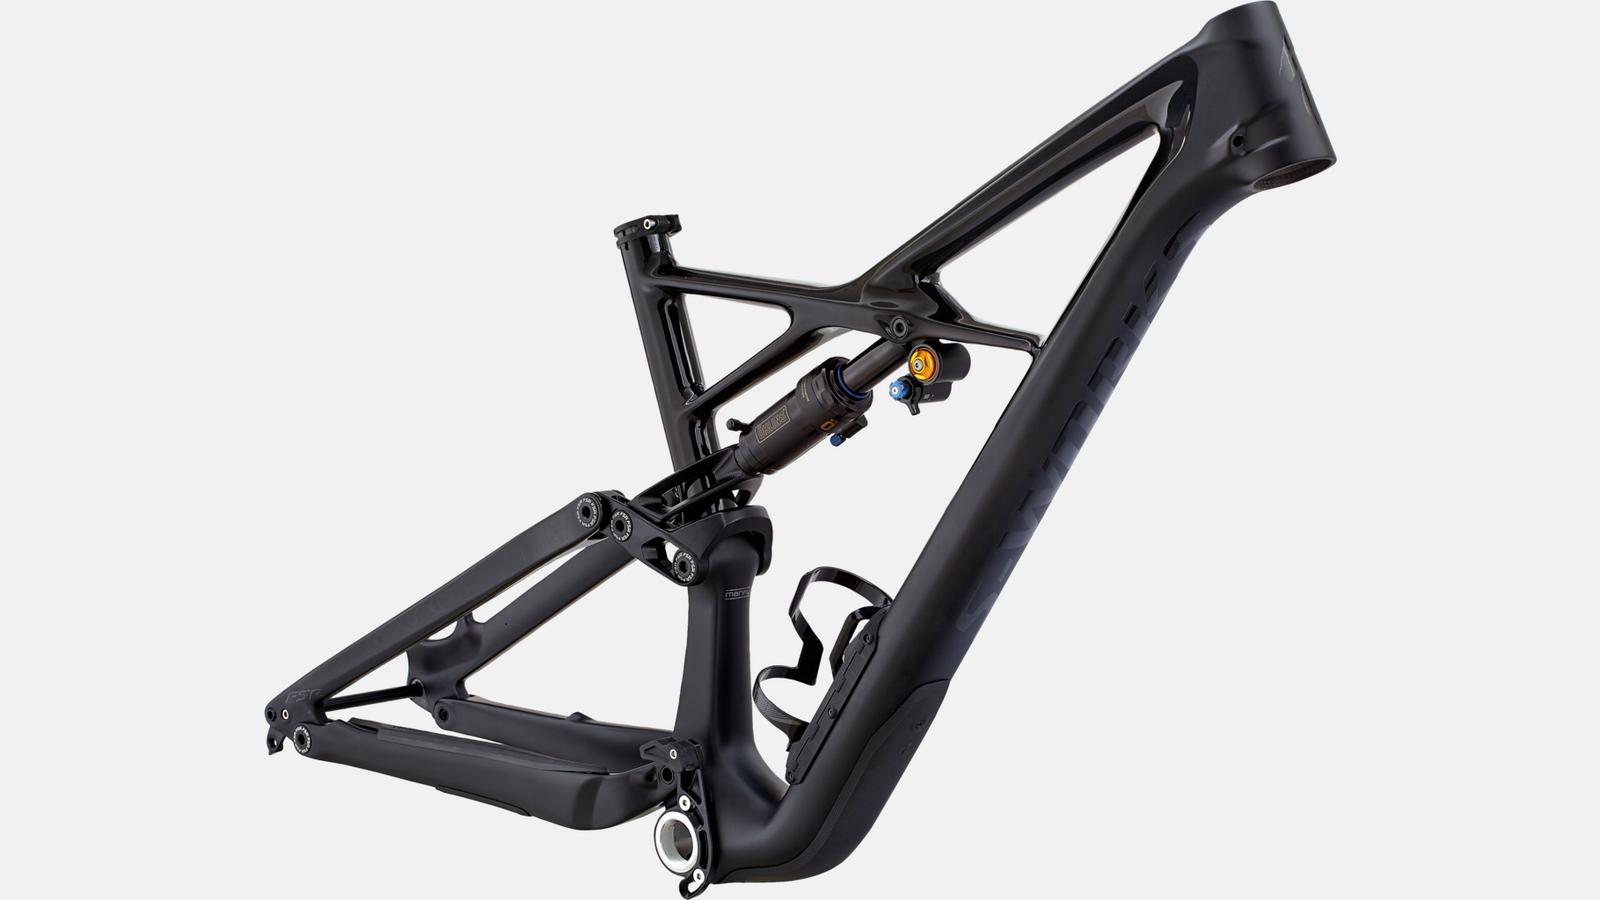 Paint for 2018 Specialized S-Works Enduro 29/6Fattie Frame - Gloss Black